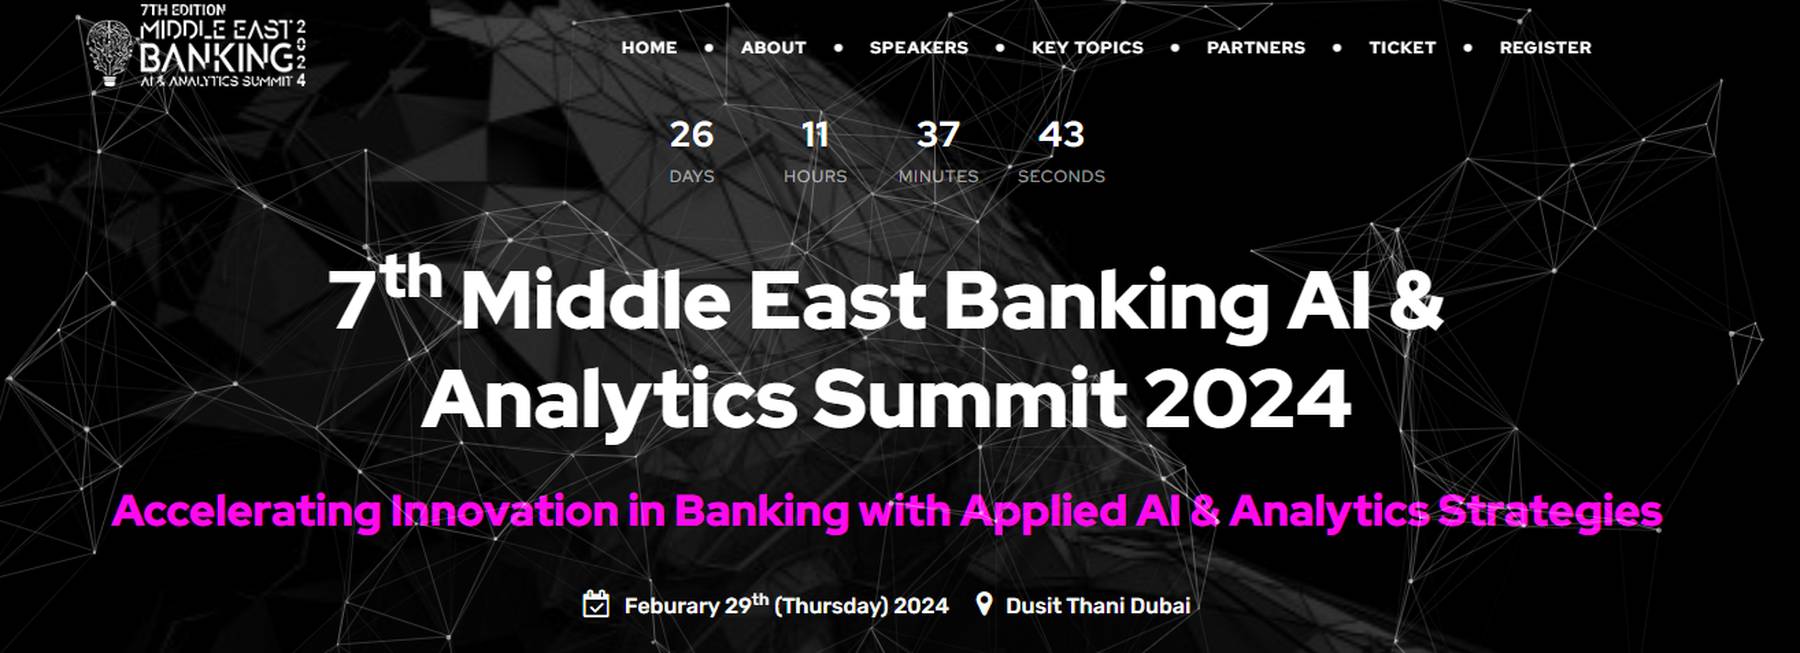 Middle East Banking AI & Analytics Summit 2024